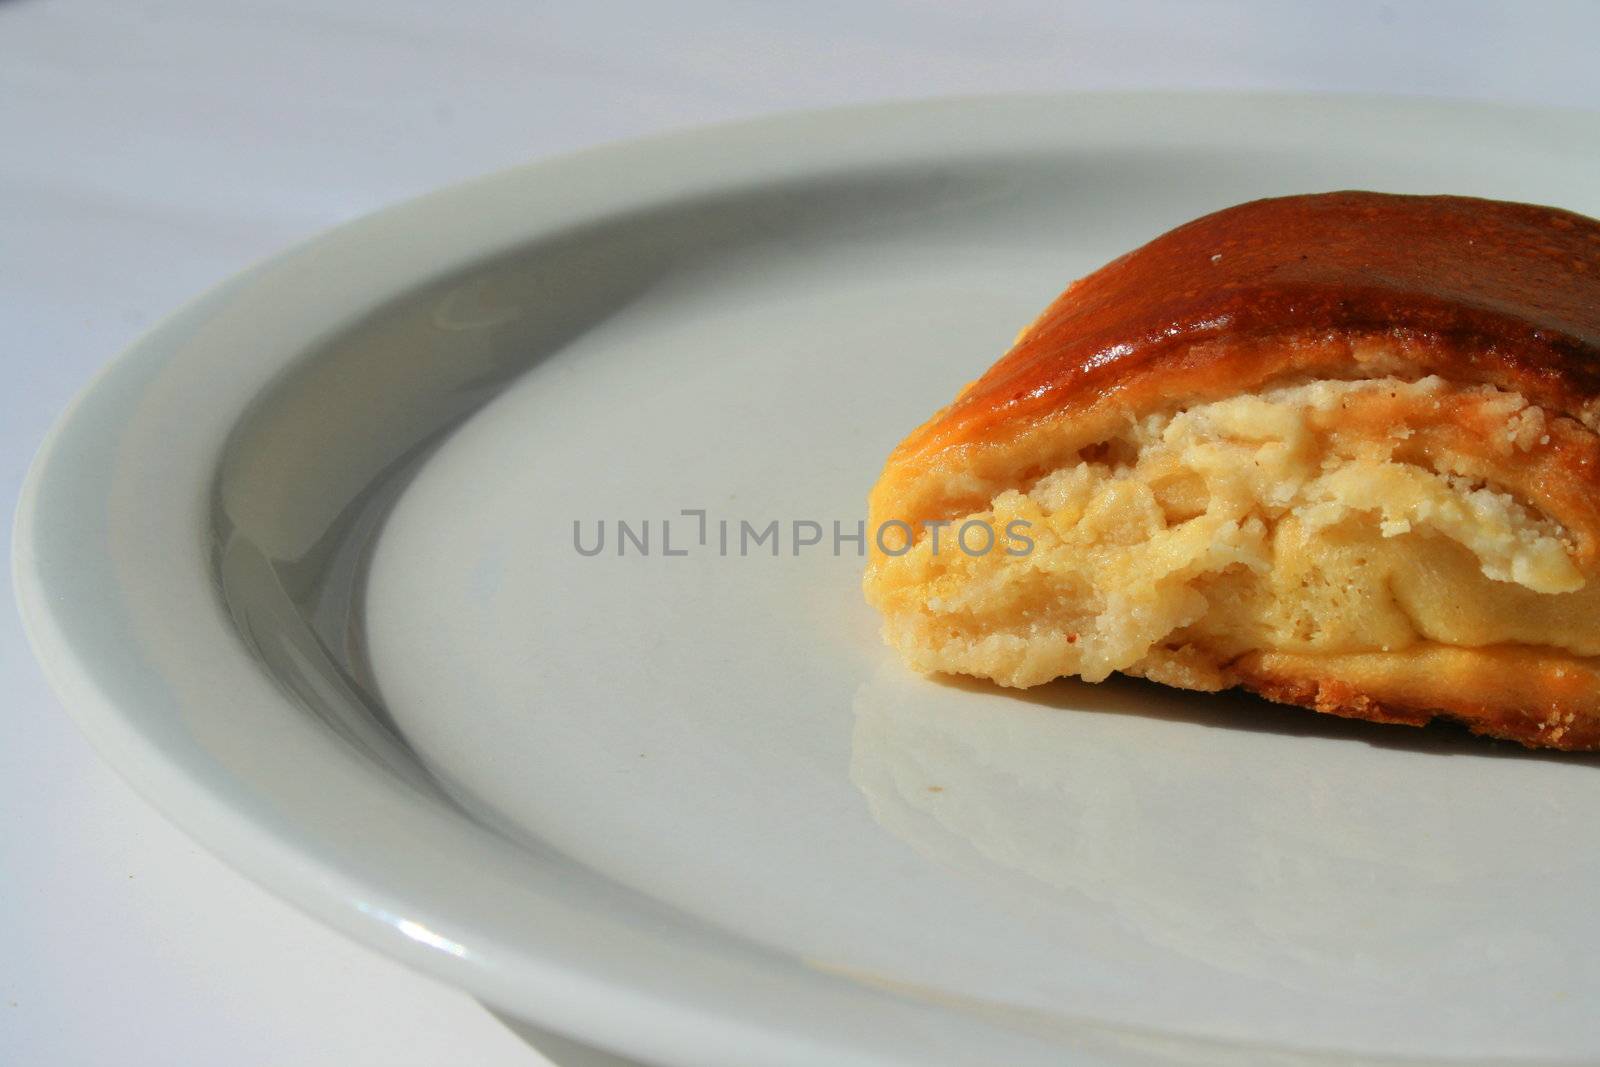 Close up of a nazook pastry on a plate.